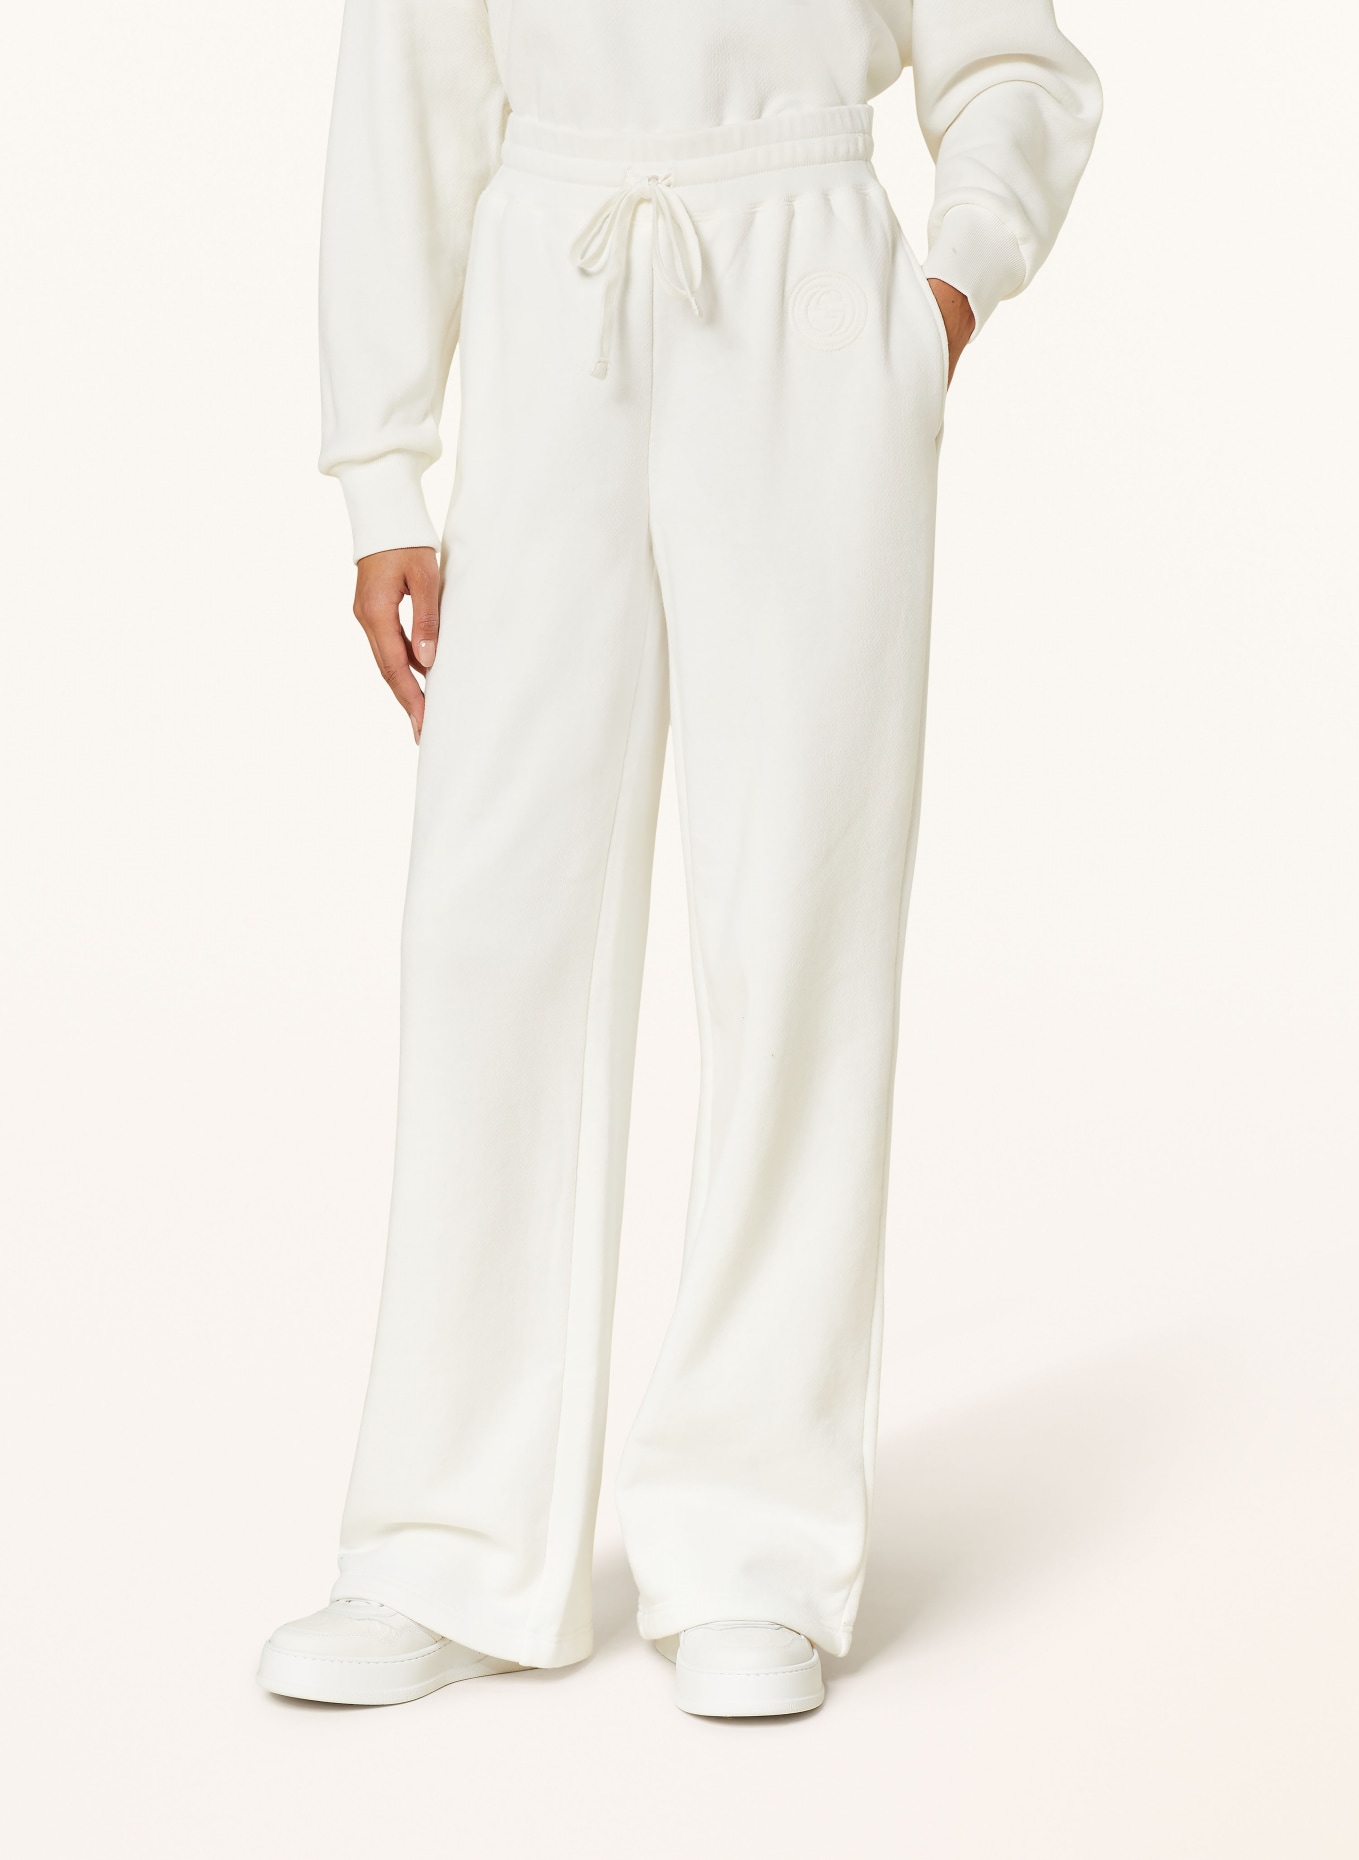 GUCCI Pants in jogger style, Color: WHITE (Image 5)